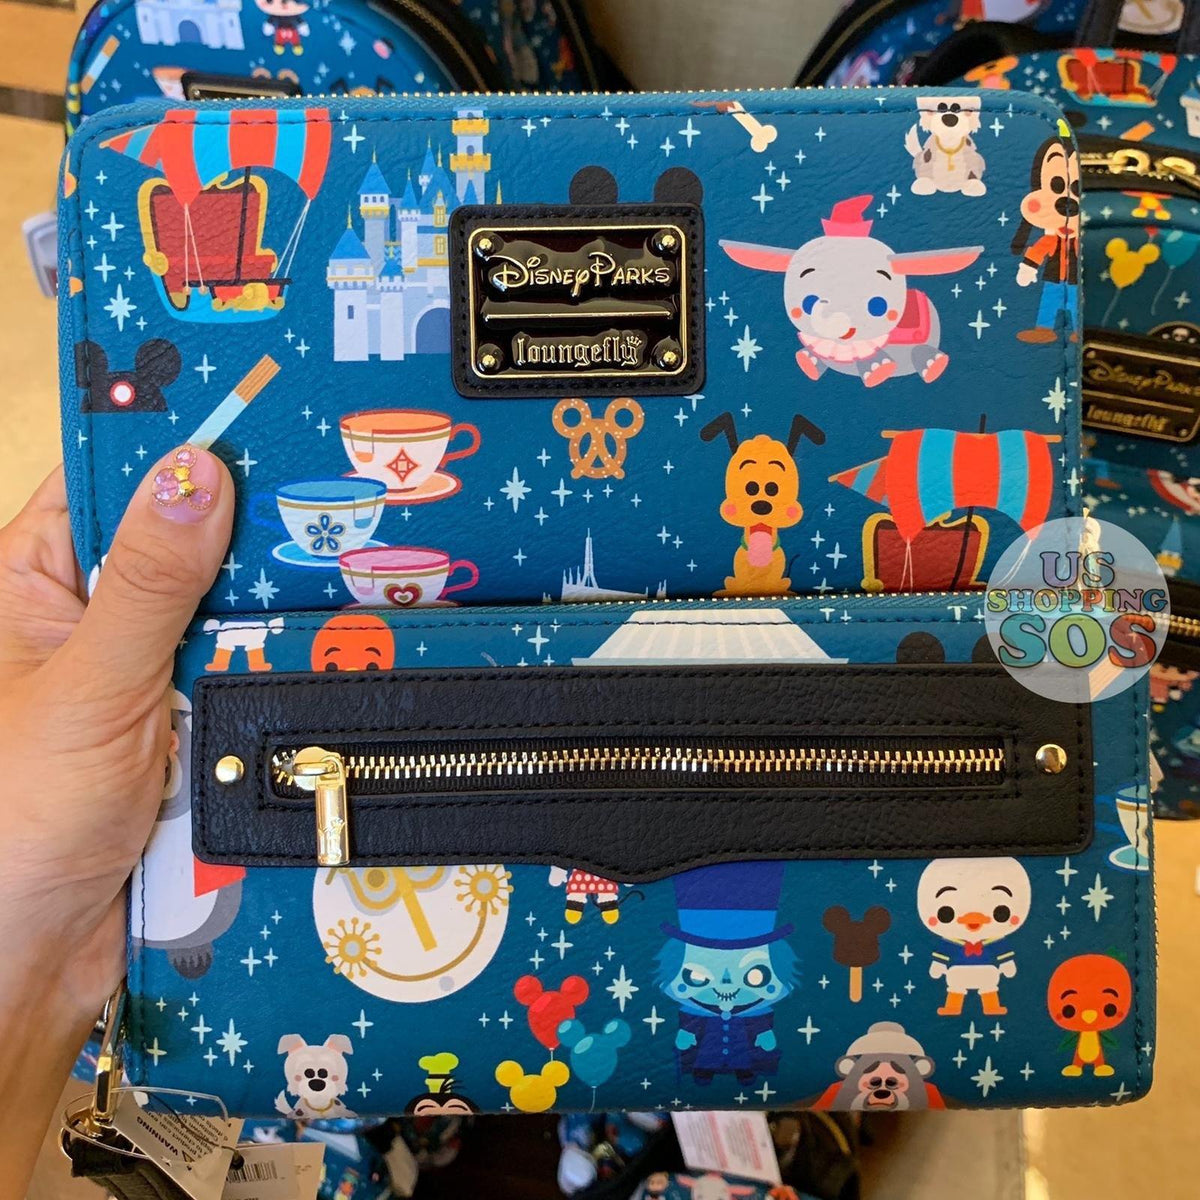 Disney Parks Loungefly Wallet